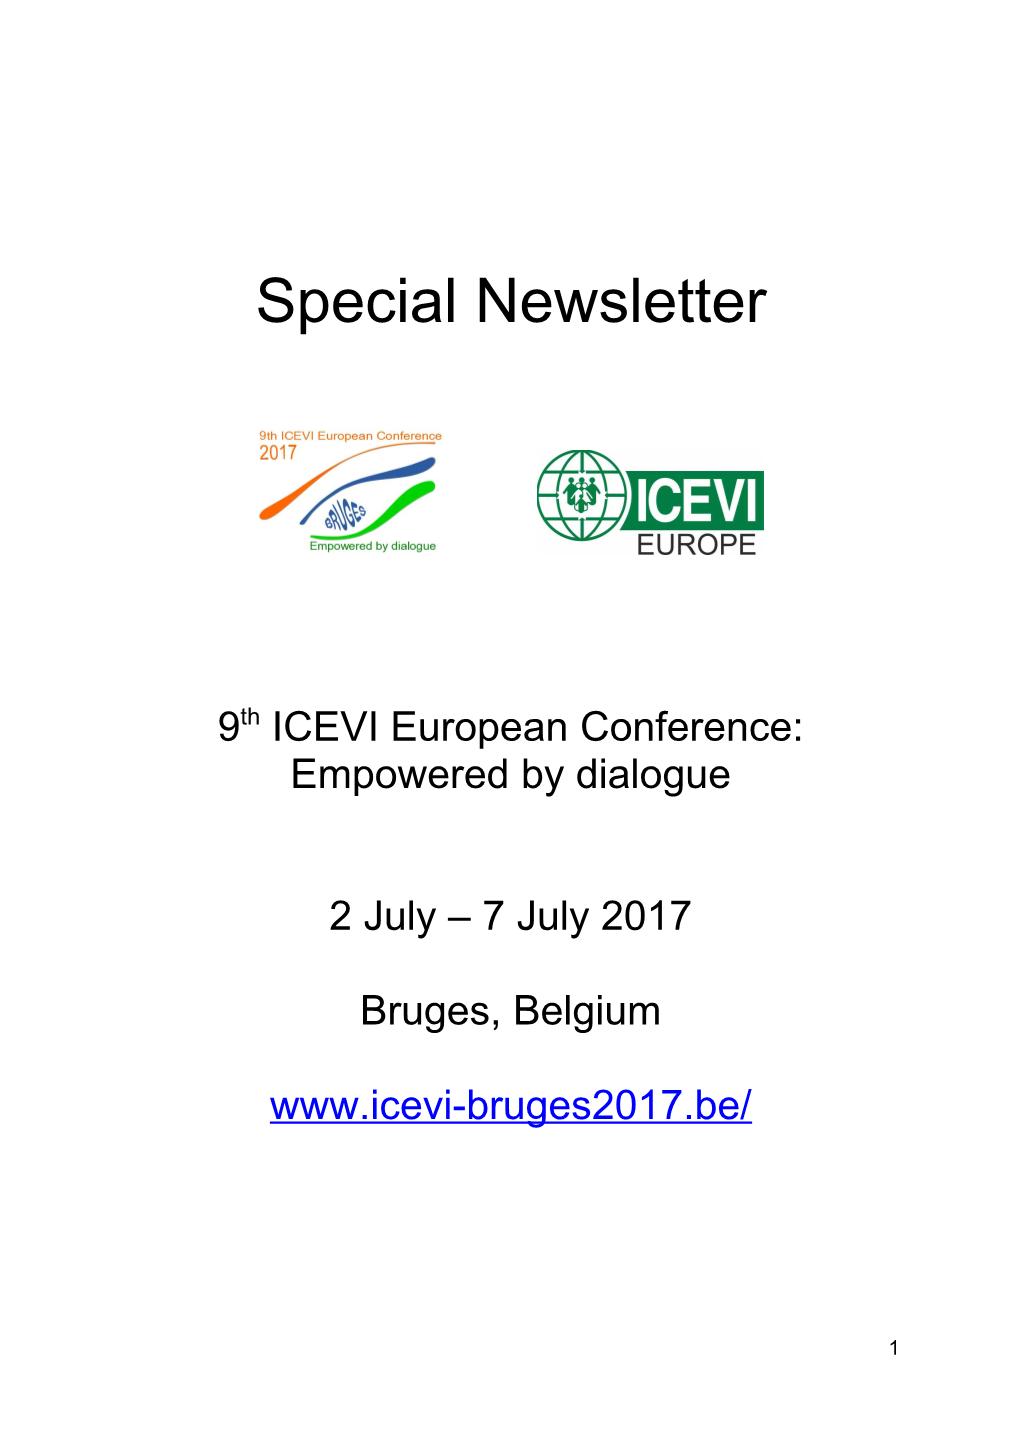 9Th ICEVI European Conference: Empowered by Dialogue